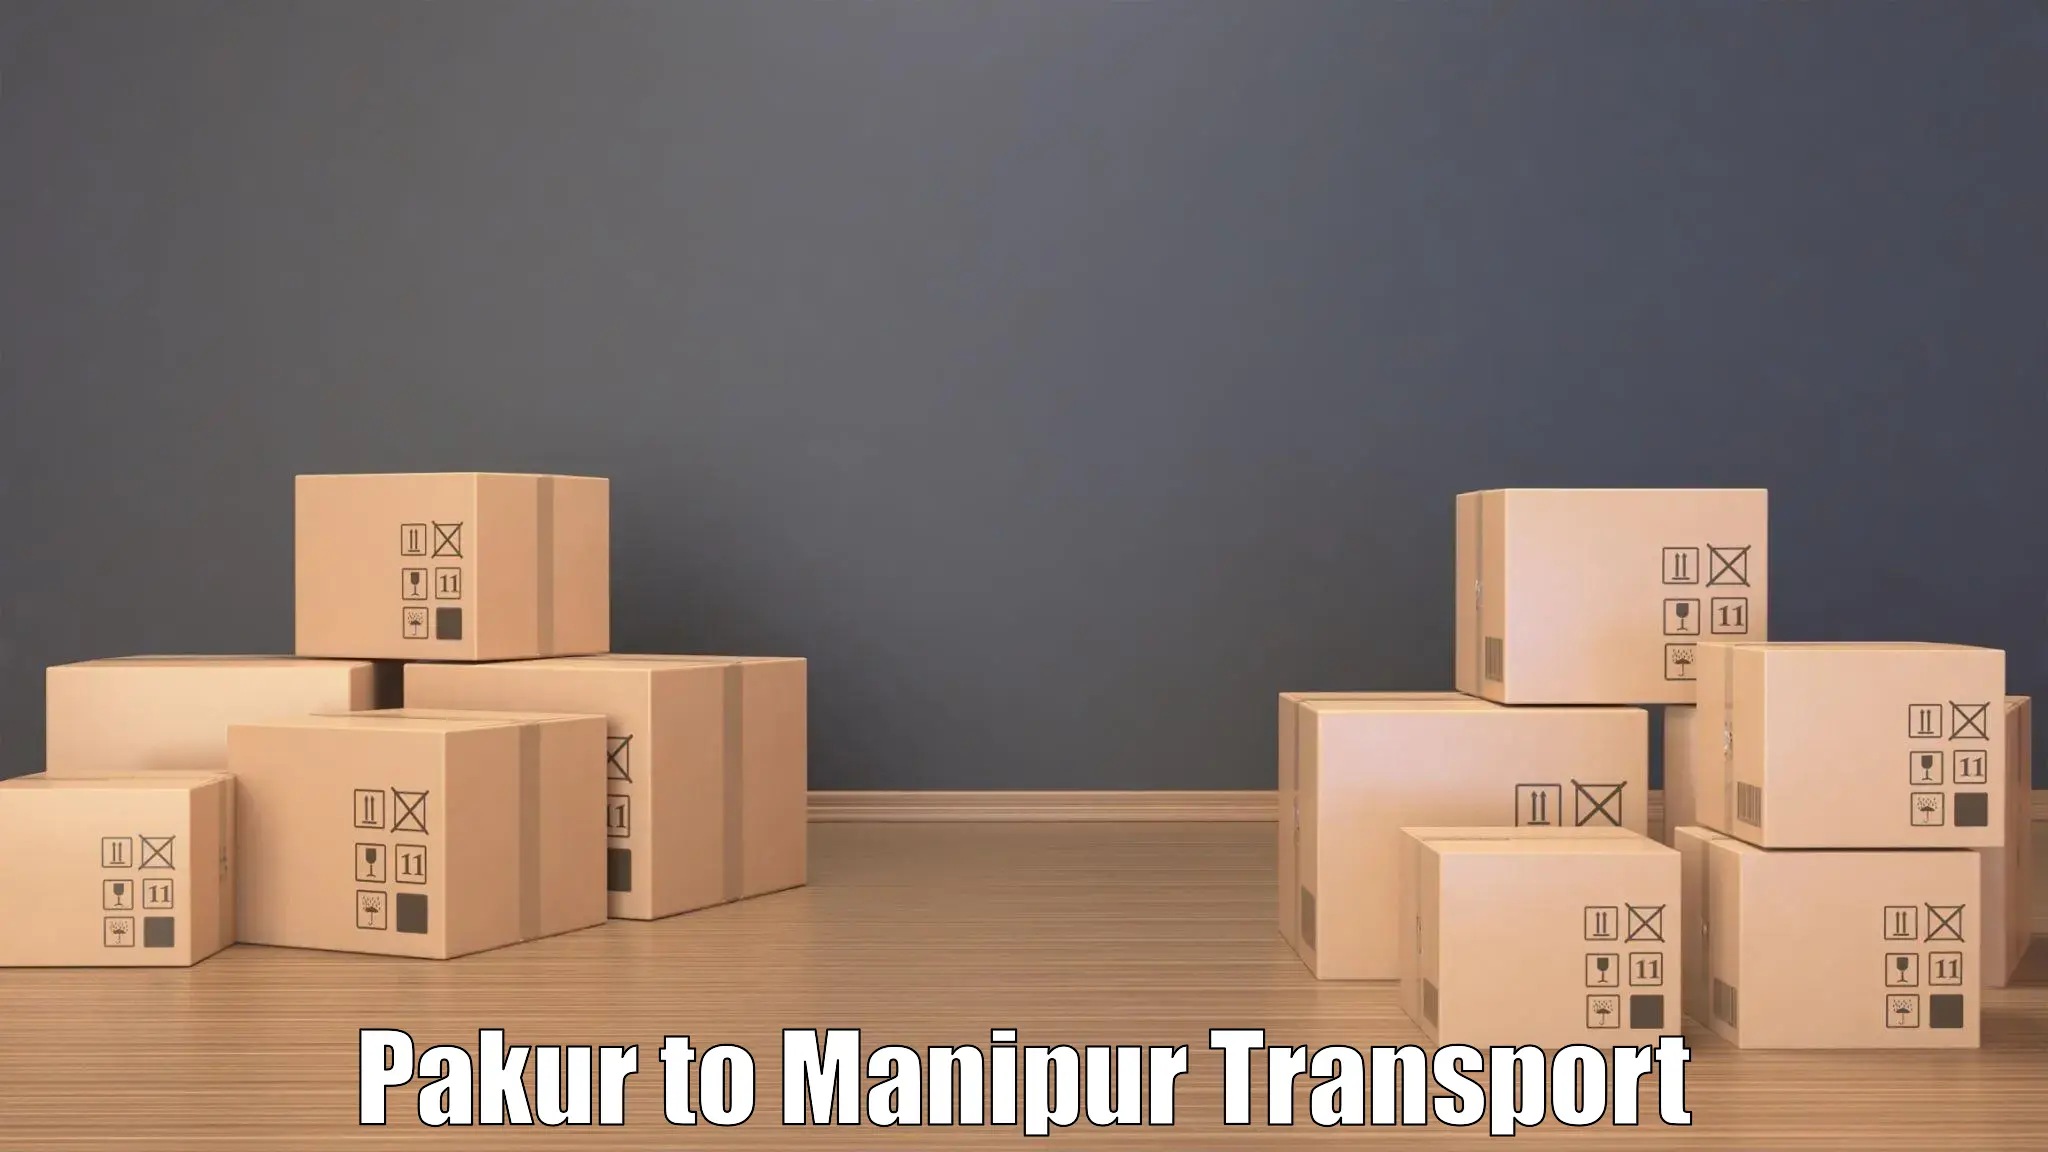 Commercial transport service Pakur to Manipur